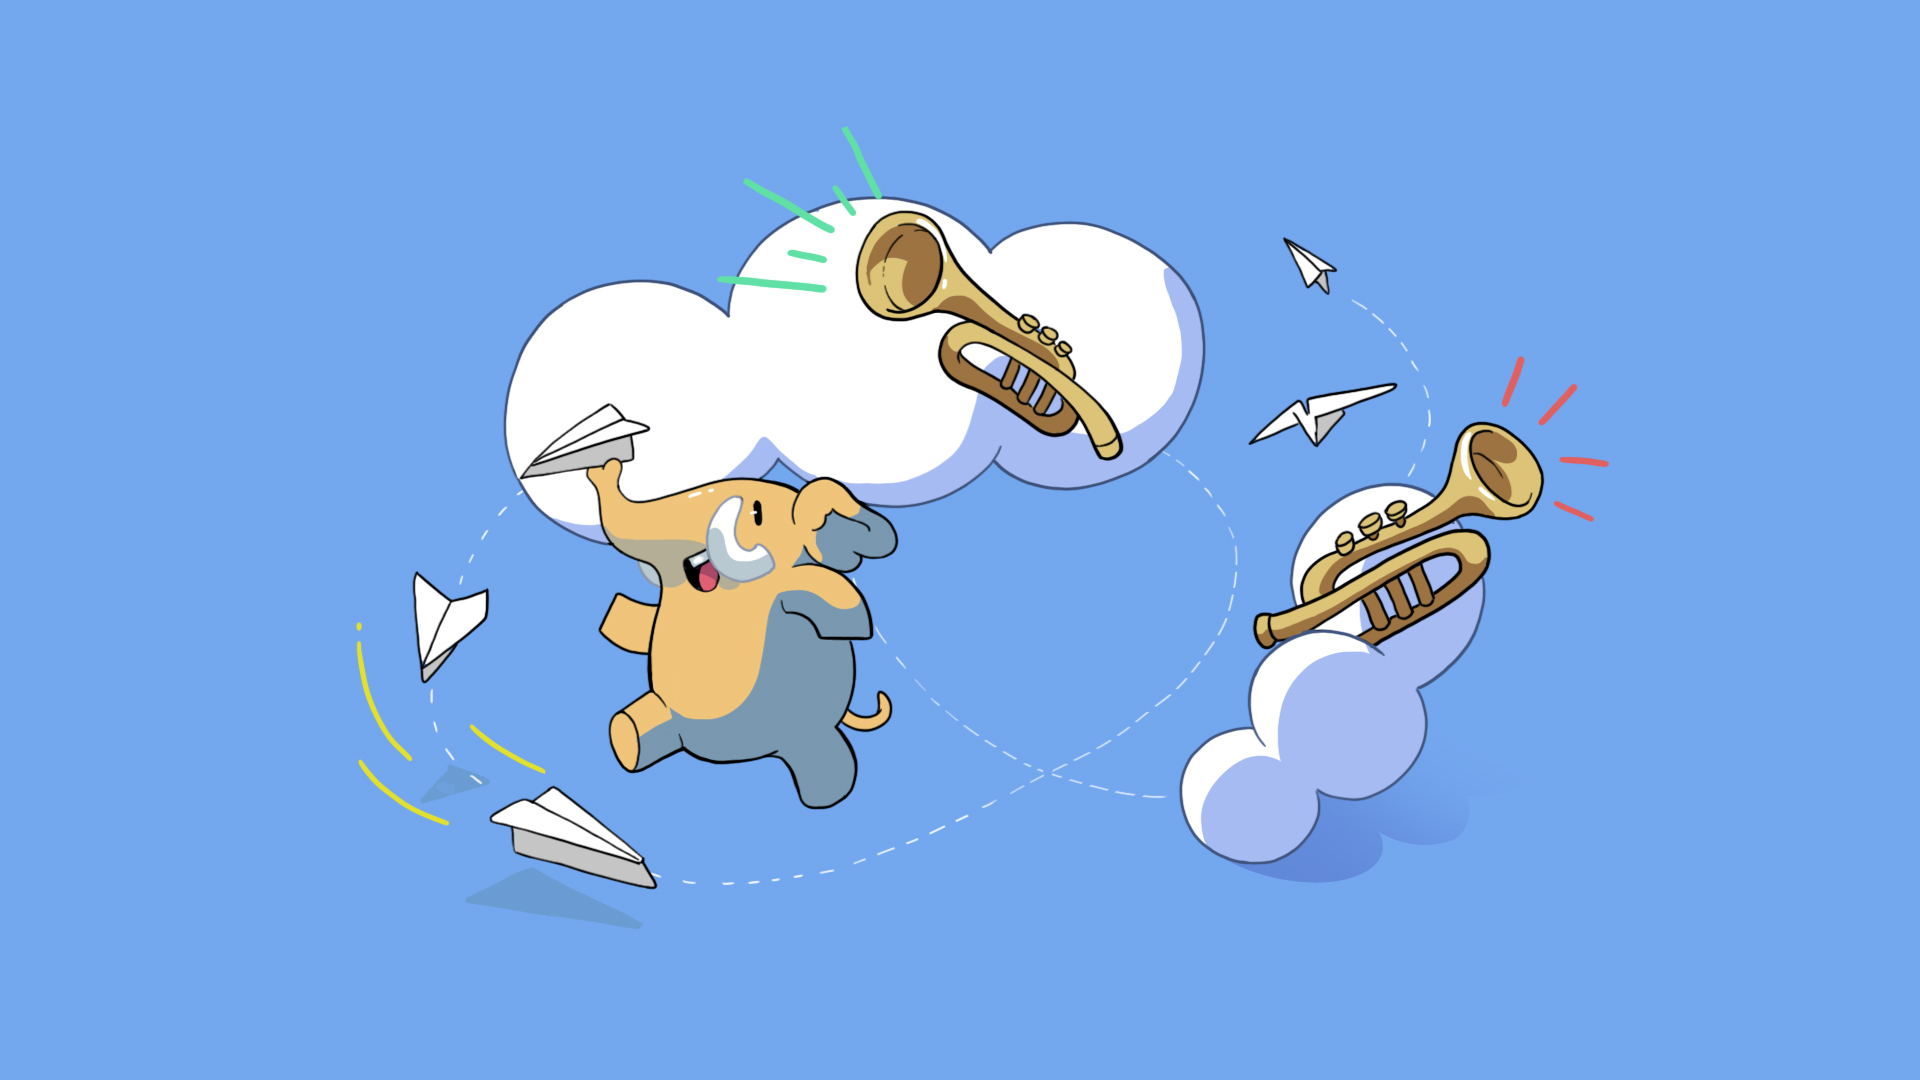 The Mastodon elephant mascot throwing paper airplanes with its trunk in a field of clouds and trumpets